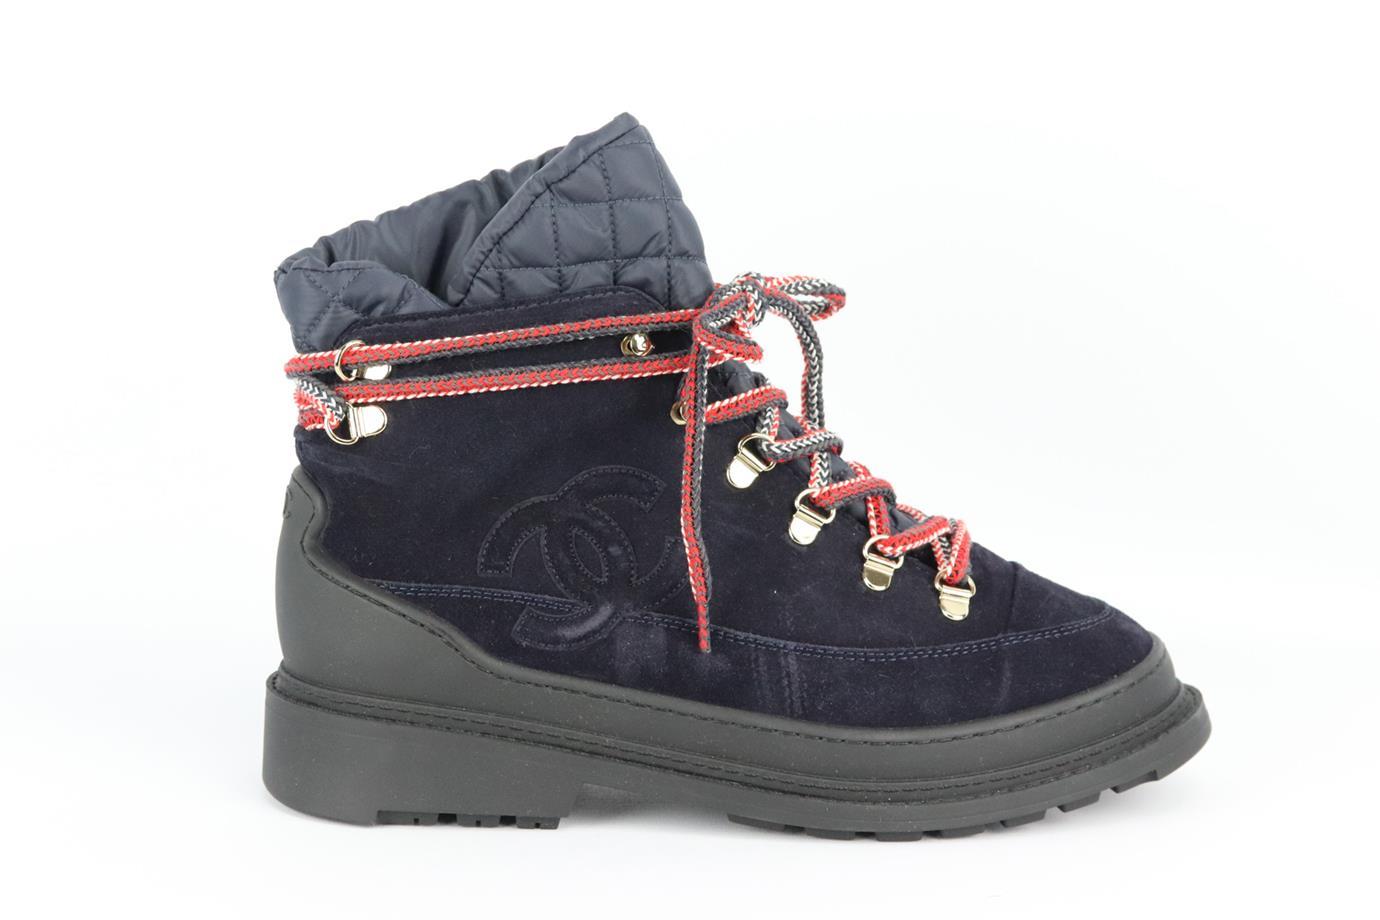 Chanel 2020 cc detailed shearling lined suede ankle boots. Navy, black and red. Lace up fastening at front. Does not come with dustbag or box. Size: EU 38.5 (5.5, US 8.5). Insole: 9.5 in. Heel: 1.25 in. New without box